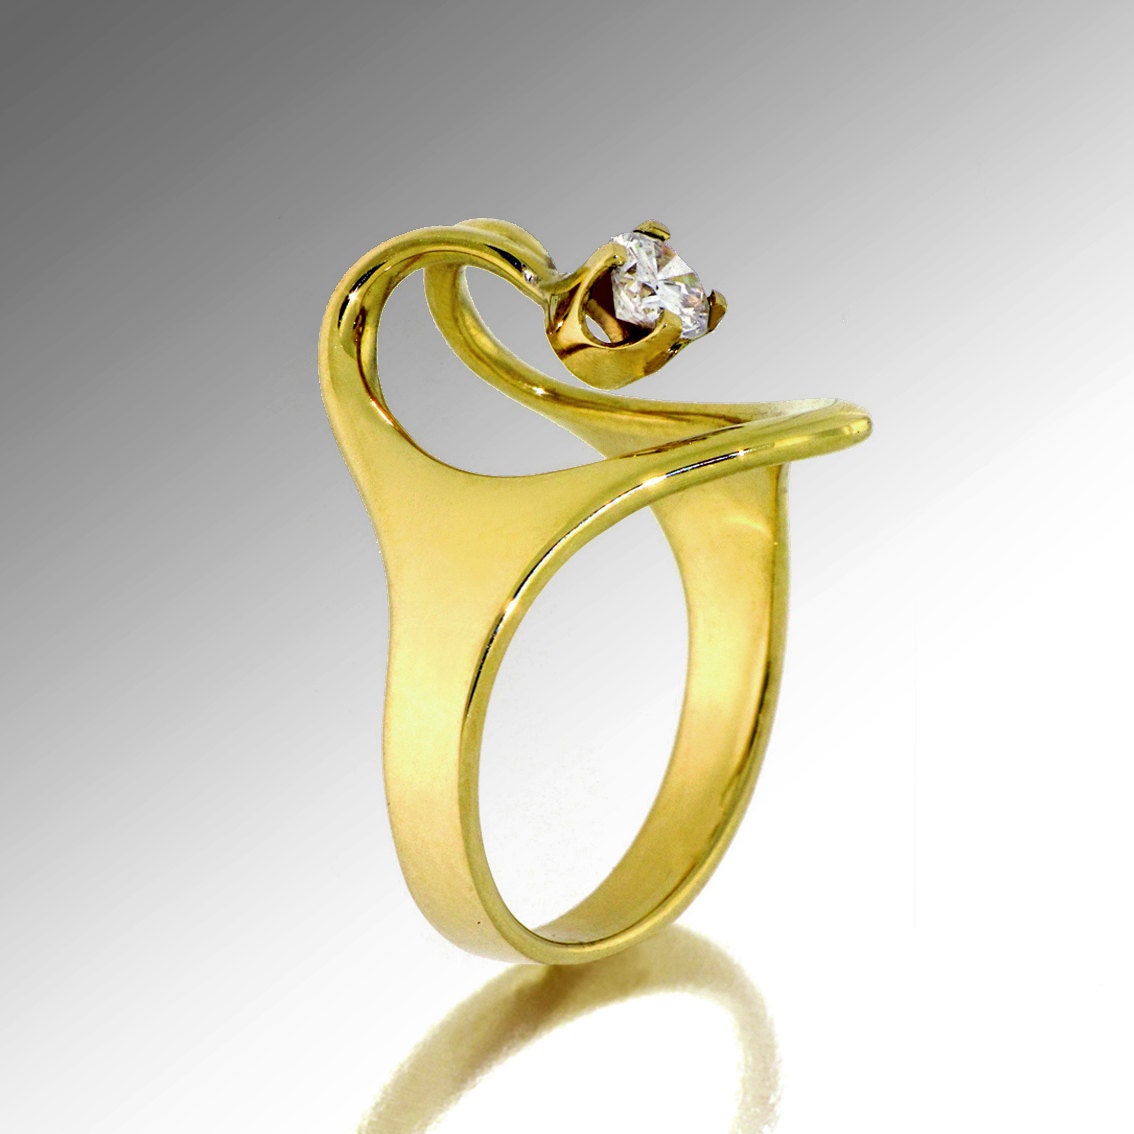 Isis Solitaire Diamond Ring